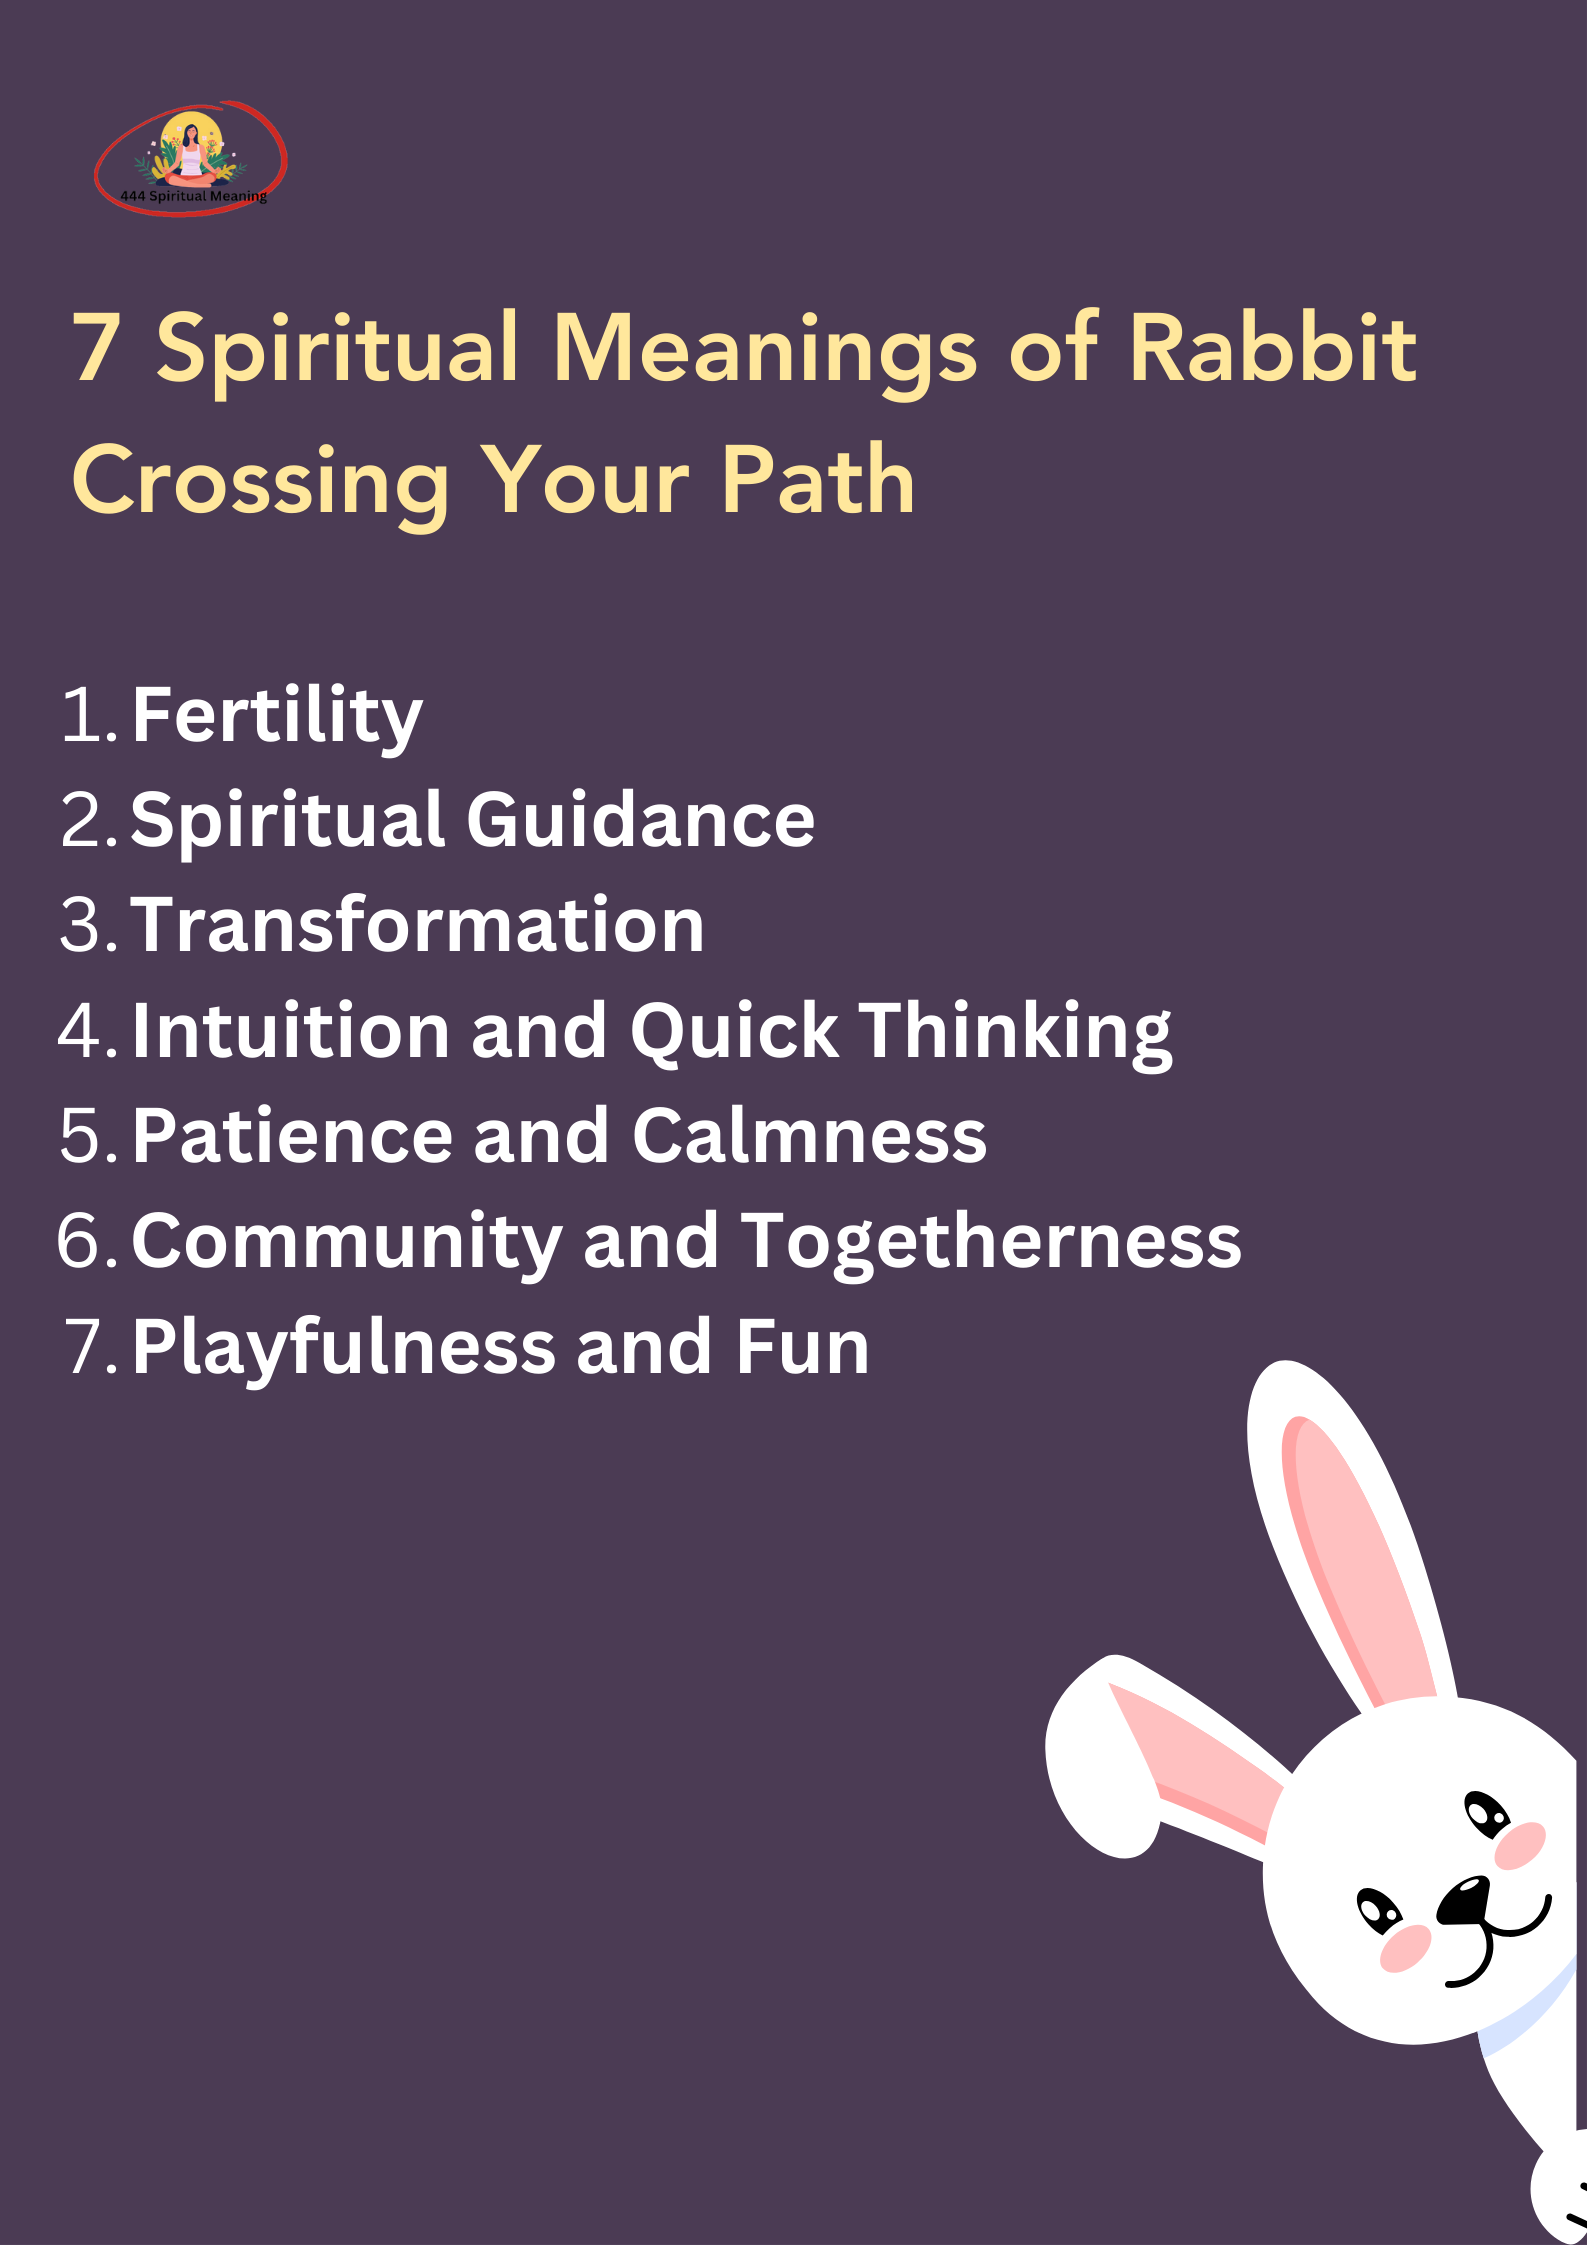 7 Spiritual Meanings of Rabbit Crossing Your Path